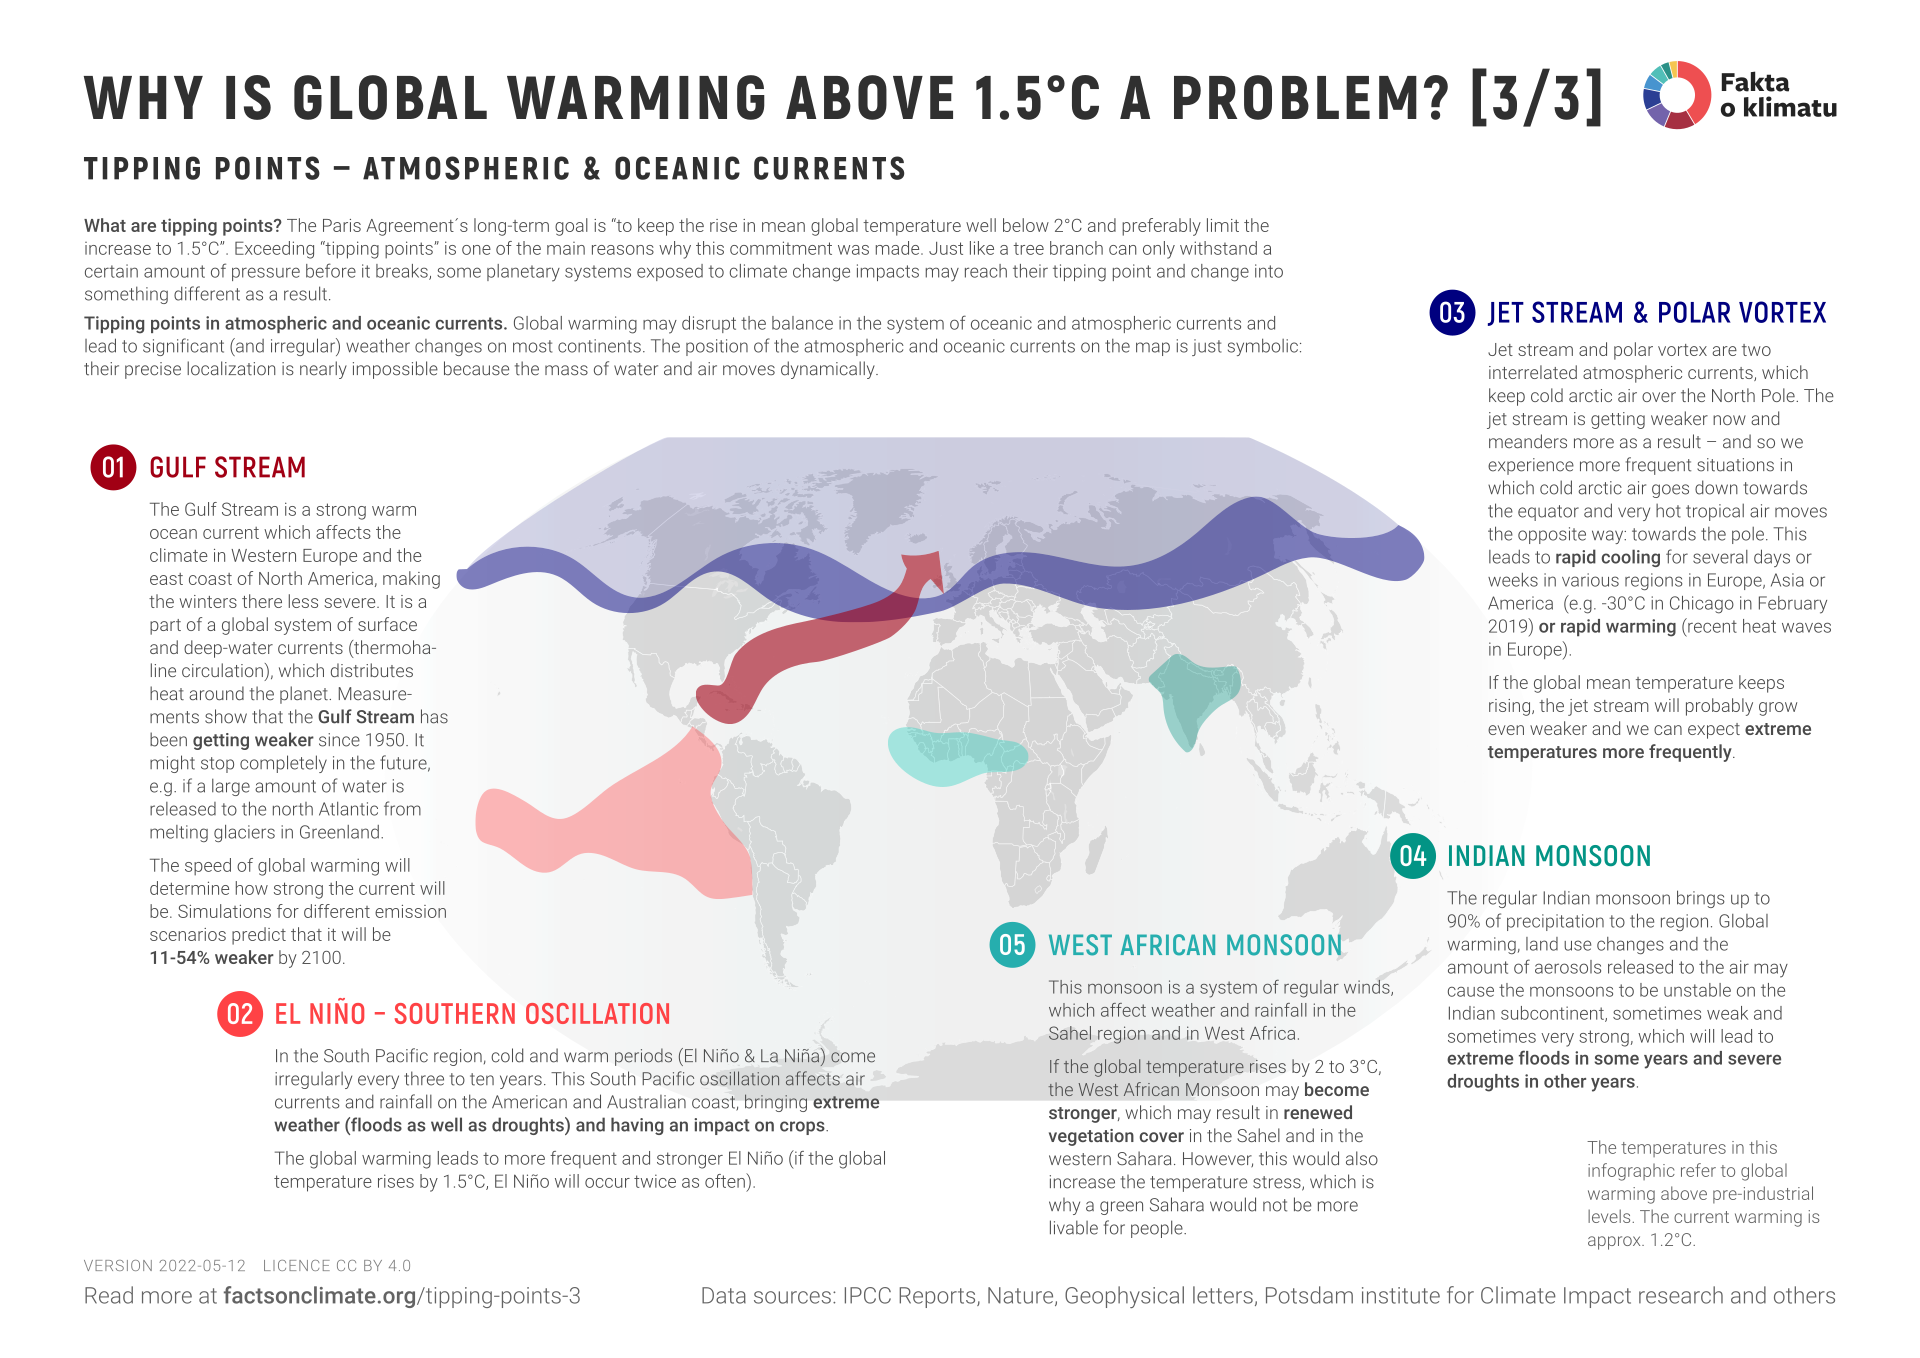 Why is global warming above 1.5°C a problem? [3/3]